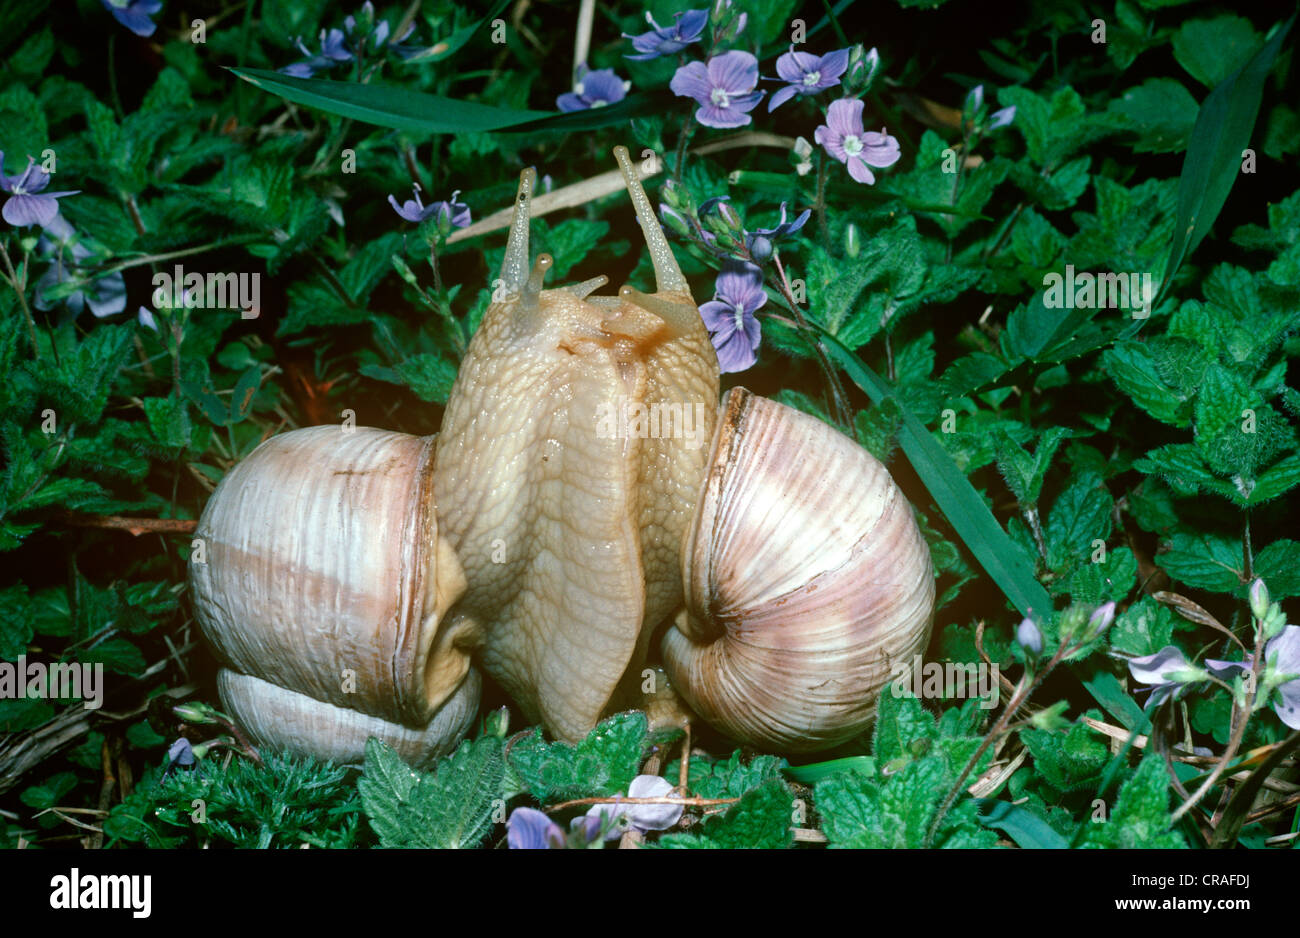 Roman/ Edible snails (Helix pomatia: Helicidae) rearing up in a courtship ritual UK Stock Photo